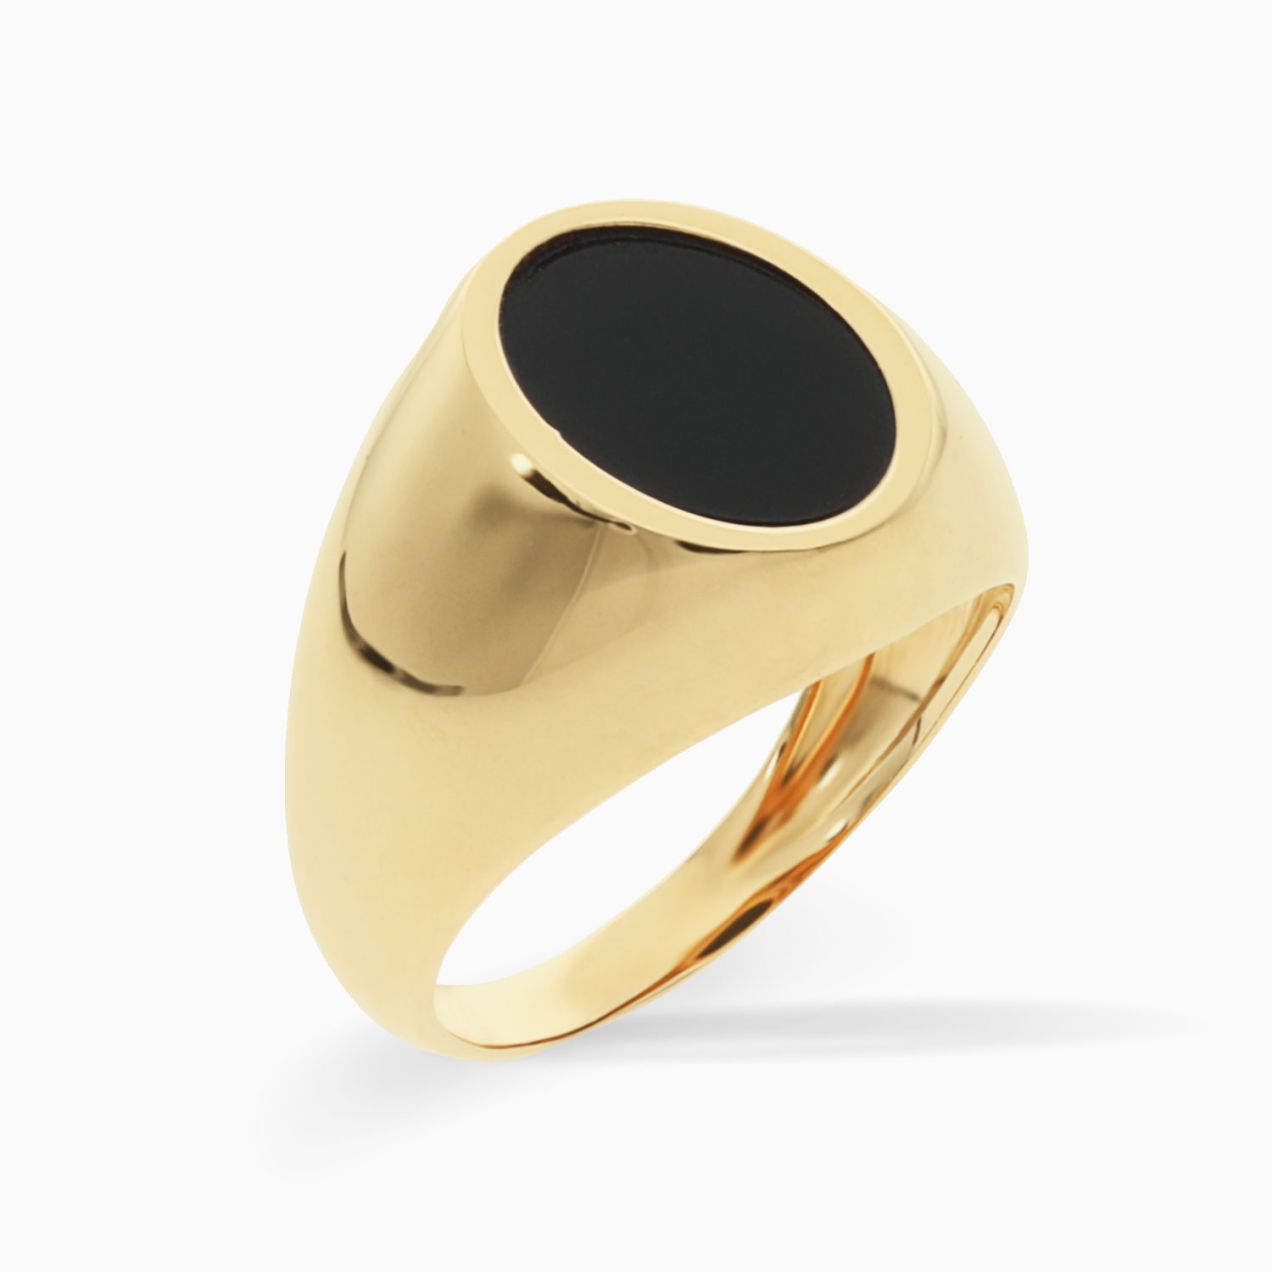 Oval signet ring in gold and onyx